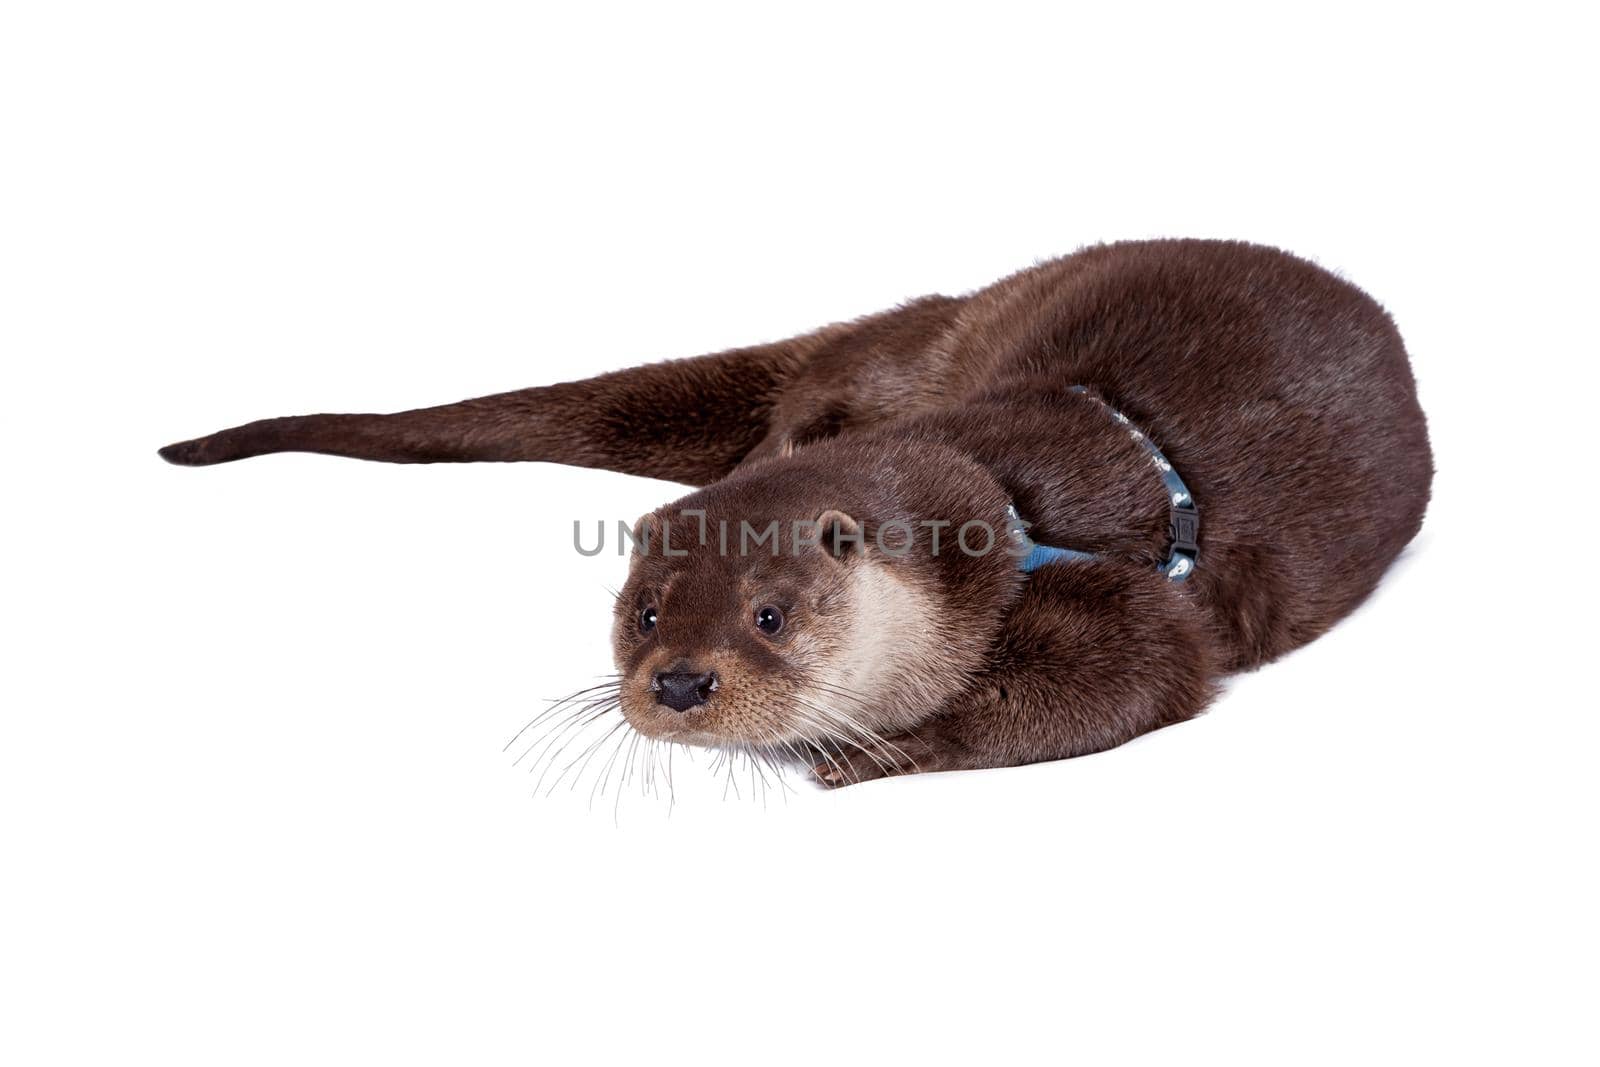 An Adult Eurasian river otter isolated on white background